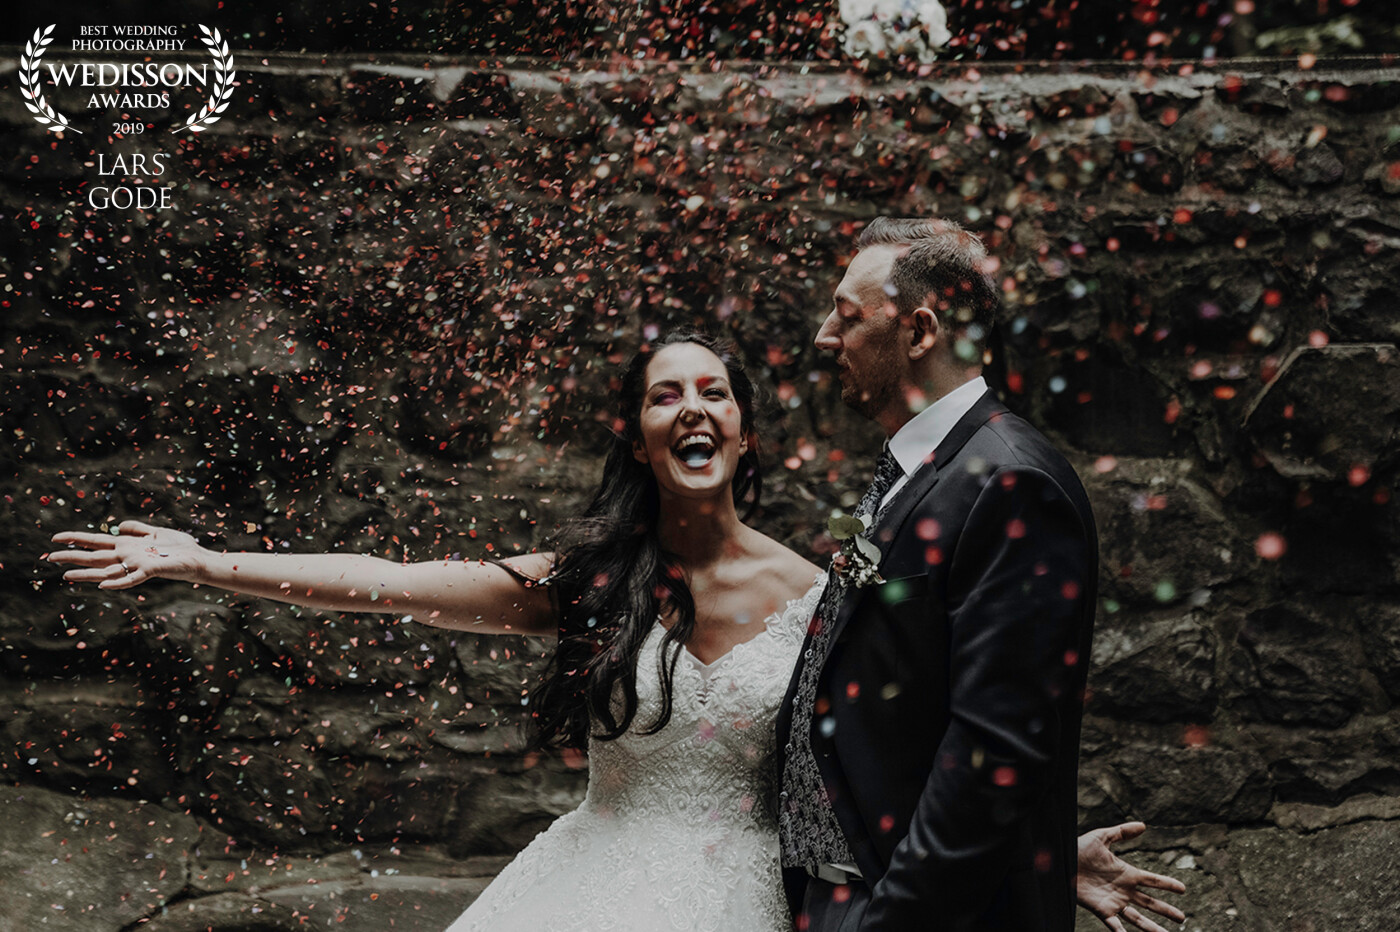 We are happiest when we can be ourselves. That's why we marry the one who takes us as we are. In this situation, I could feel this absolute happiness. Luck makes our lives more colorful - as colorful as confetti. :-) I love it.